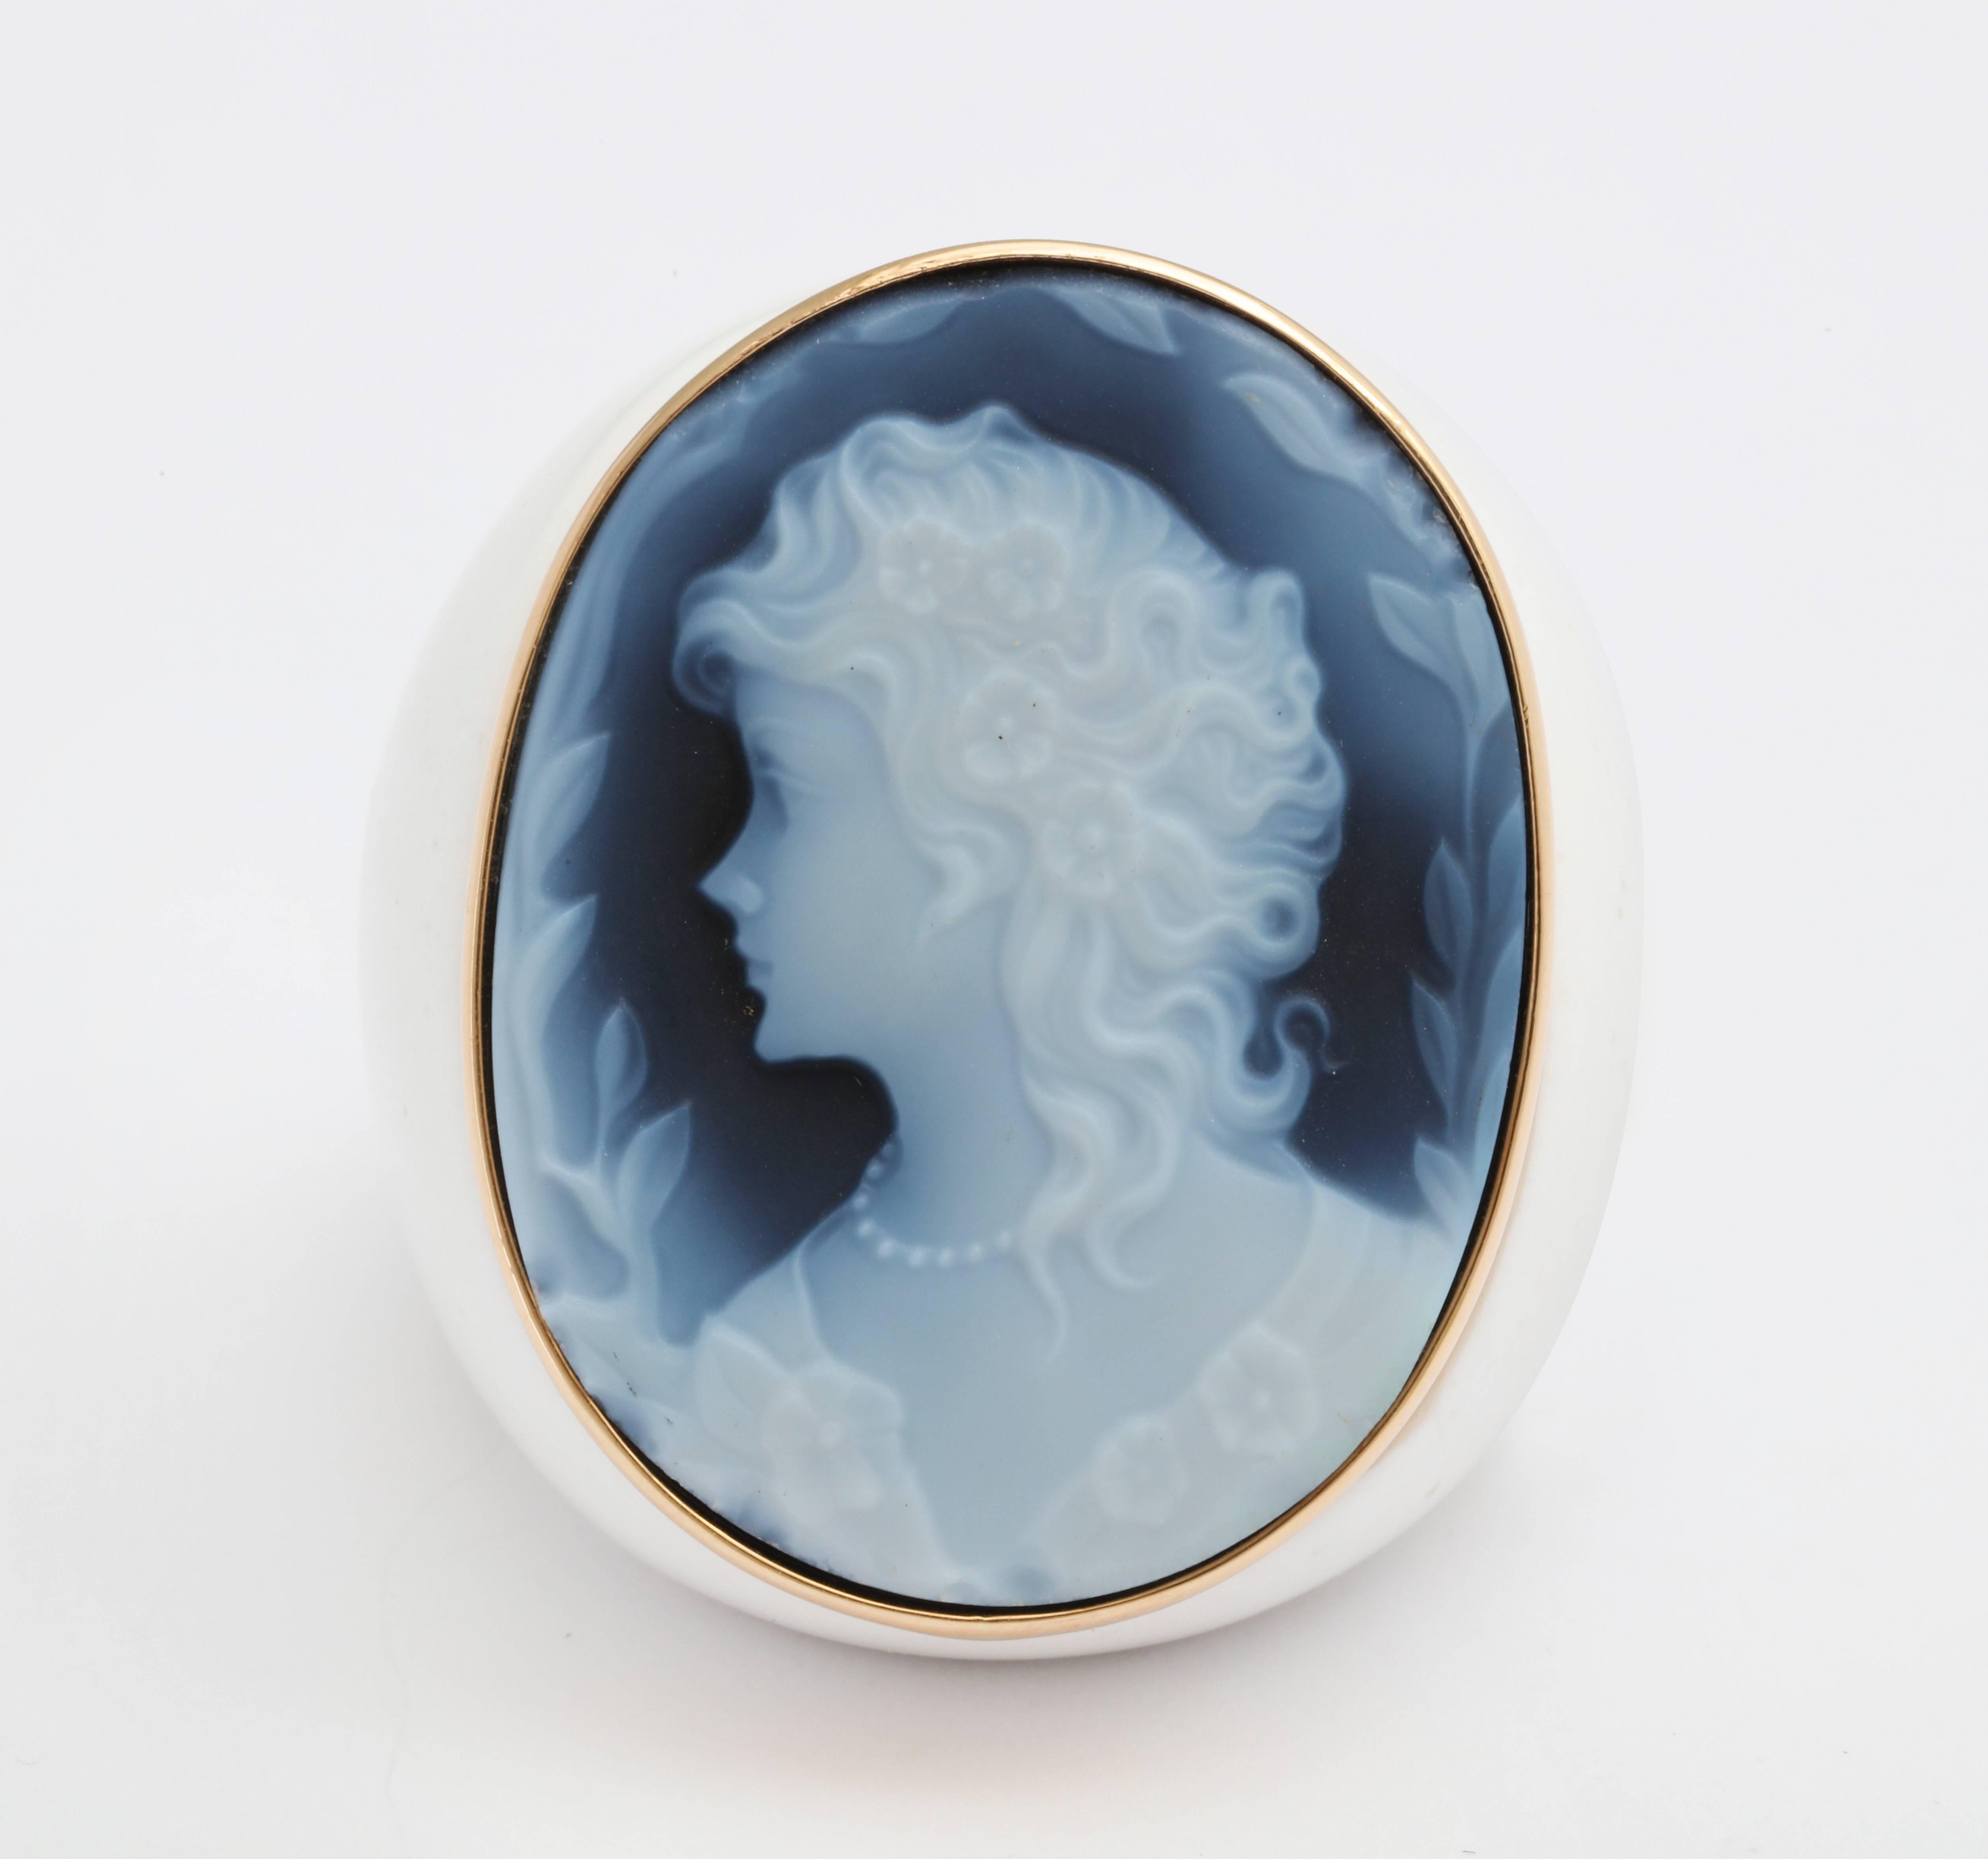 30mm blue agate cameo, hand-carved set in 14kt yellow gold on white agate base.
Ring Size: US 7 3/4
*Being these are hand crafted one of a kind designs, not all ring sizes might be immediately available. We offer custom sizing free of charge. 
Enter